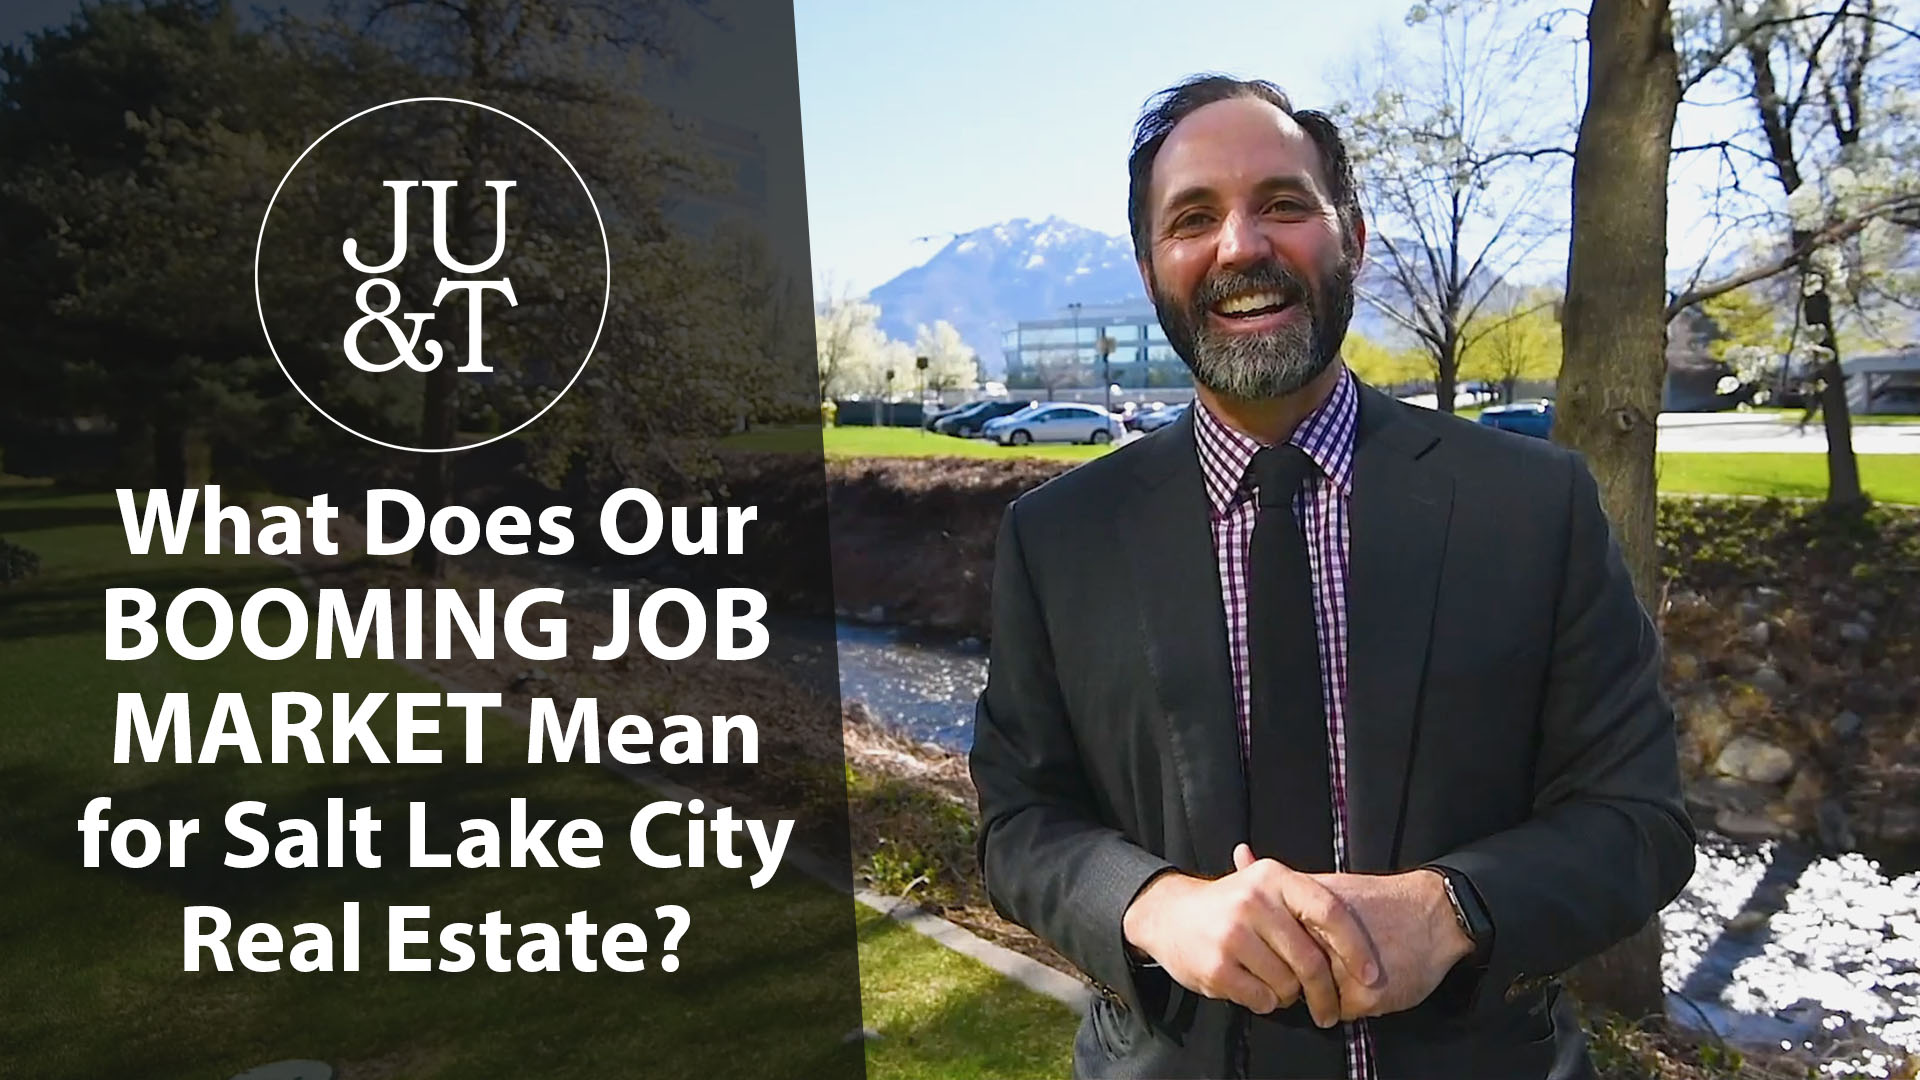 The Impact of Job Growth in Salt Lake City